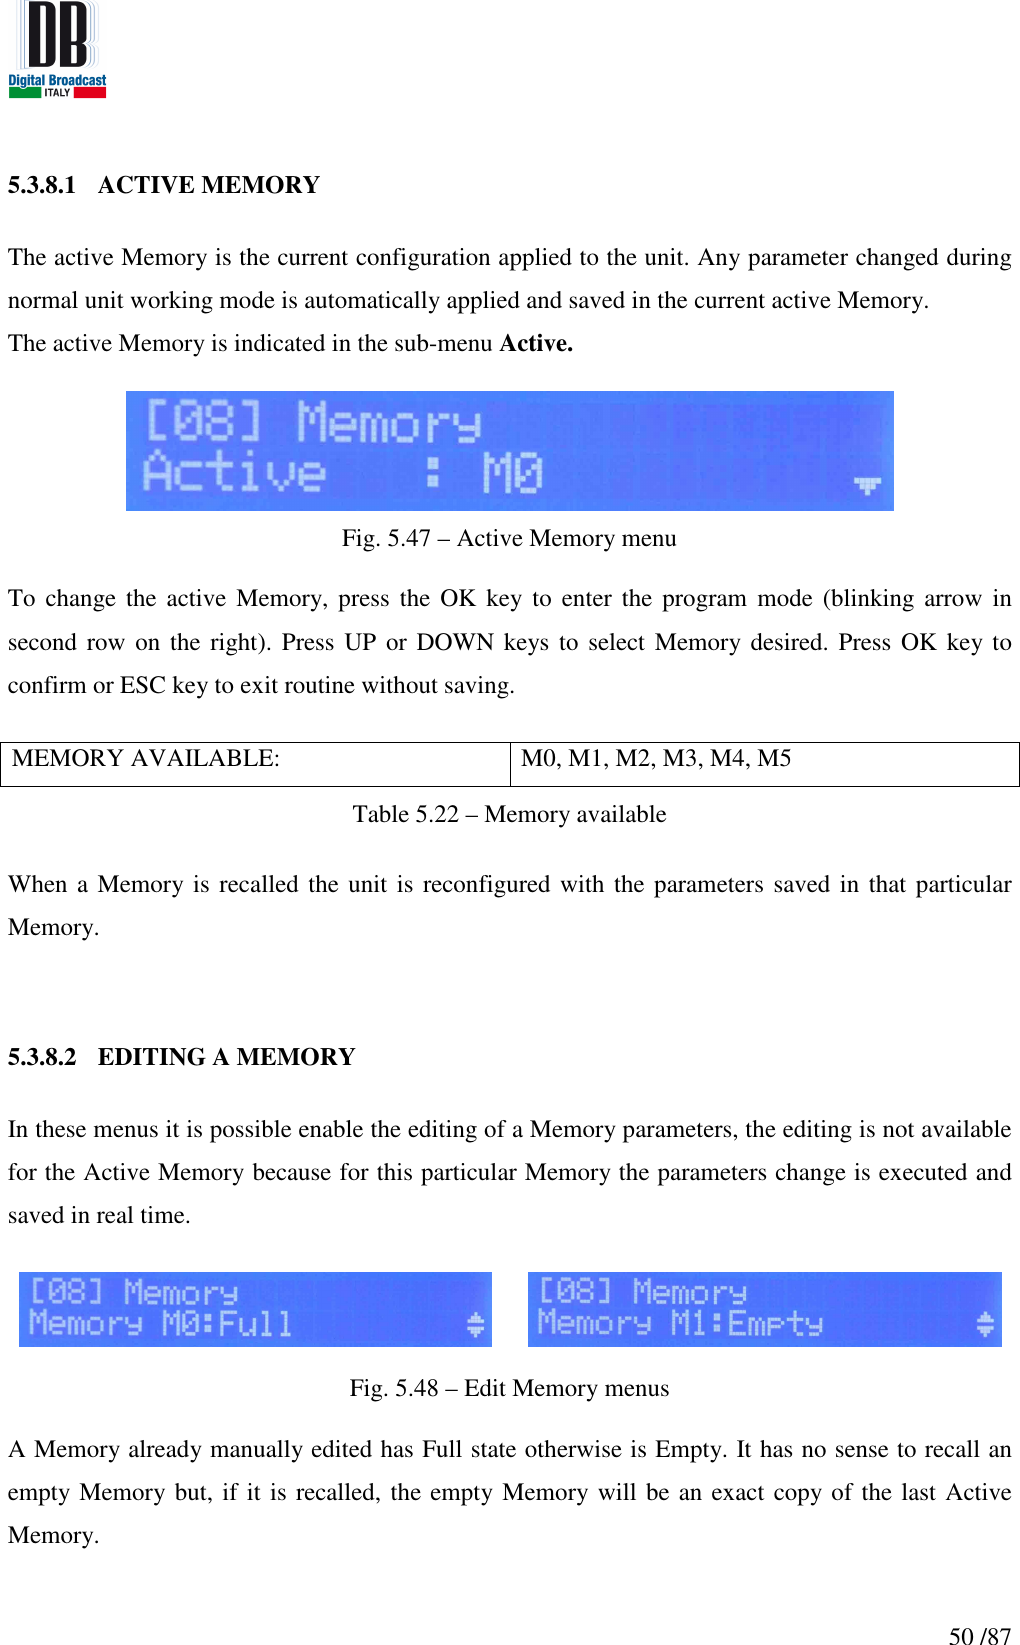   50 /87 5.3.8.1 ACTIVE MEMORY  The active Memory is the current configuration applied to the unit. Any parameter changed during normal unit working mode is automatically applied and saved in the current active Memory. The active Memory is indicated in the sub-menu Active.    Fig. 5.47 – Active Memory menu  To change  the active  Memory, press  the OK  key to  enter the  program  mode  (blinking arrow  in second row on the  right). Press UP  or DOWN keys to  select Memory desired. Press OK key to confirm or ESC key to exit routine without saving.  MEMORY AVAILABLE:  M0, M1, M2, M3, M4, M5 Table 5.22 – Memory available  When a Memory is recalled the unit is reconfigured with the parameters saved in that particular Memory.   5.3.8.2 EDITING A MEMORY    In these menus it is possible enable the editing of a Memory parameters, the editing is not available for the Active Memory because for this particular Memory the parameters change is executed and saved in real time.     Fig. 5.48 – Edit Memory menus  A Memory already manually edited has Full state otherwise is Empty. It has no sense to recall an empty Memory but, if it is recalled, the empty Memory will be an exact copy of the last Active Memory.     